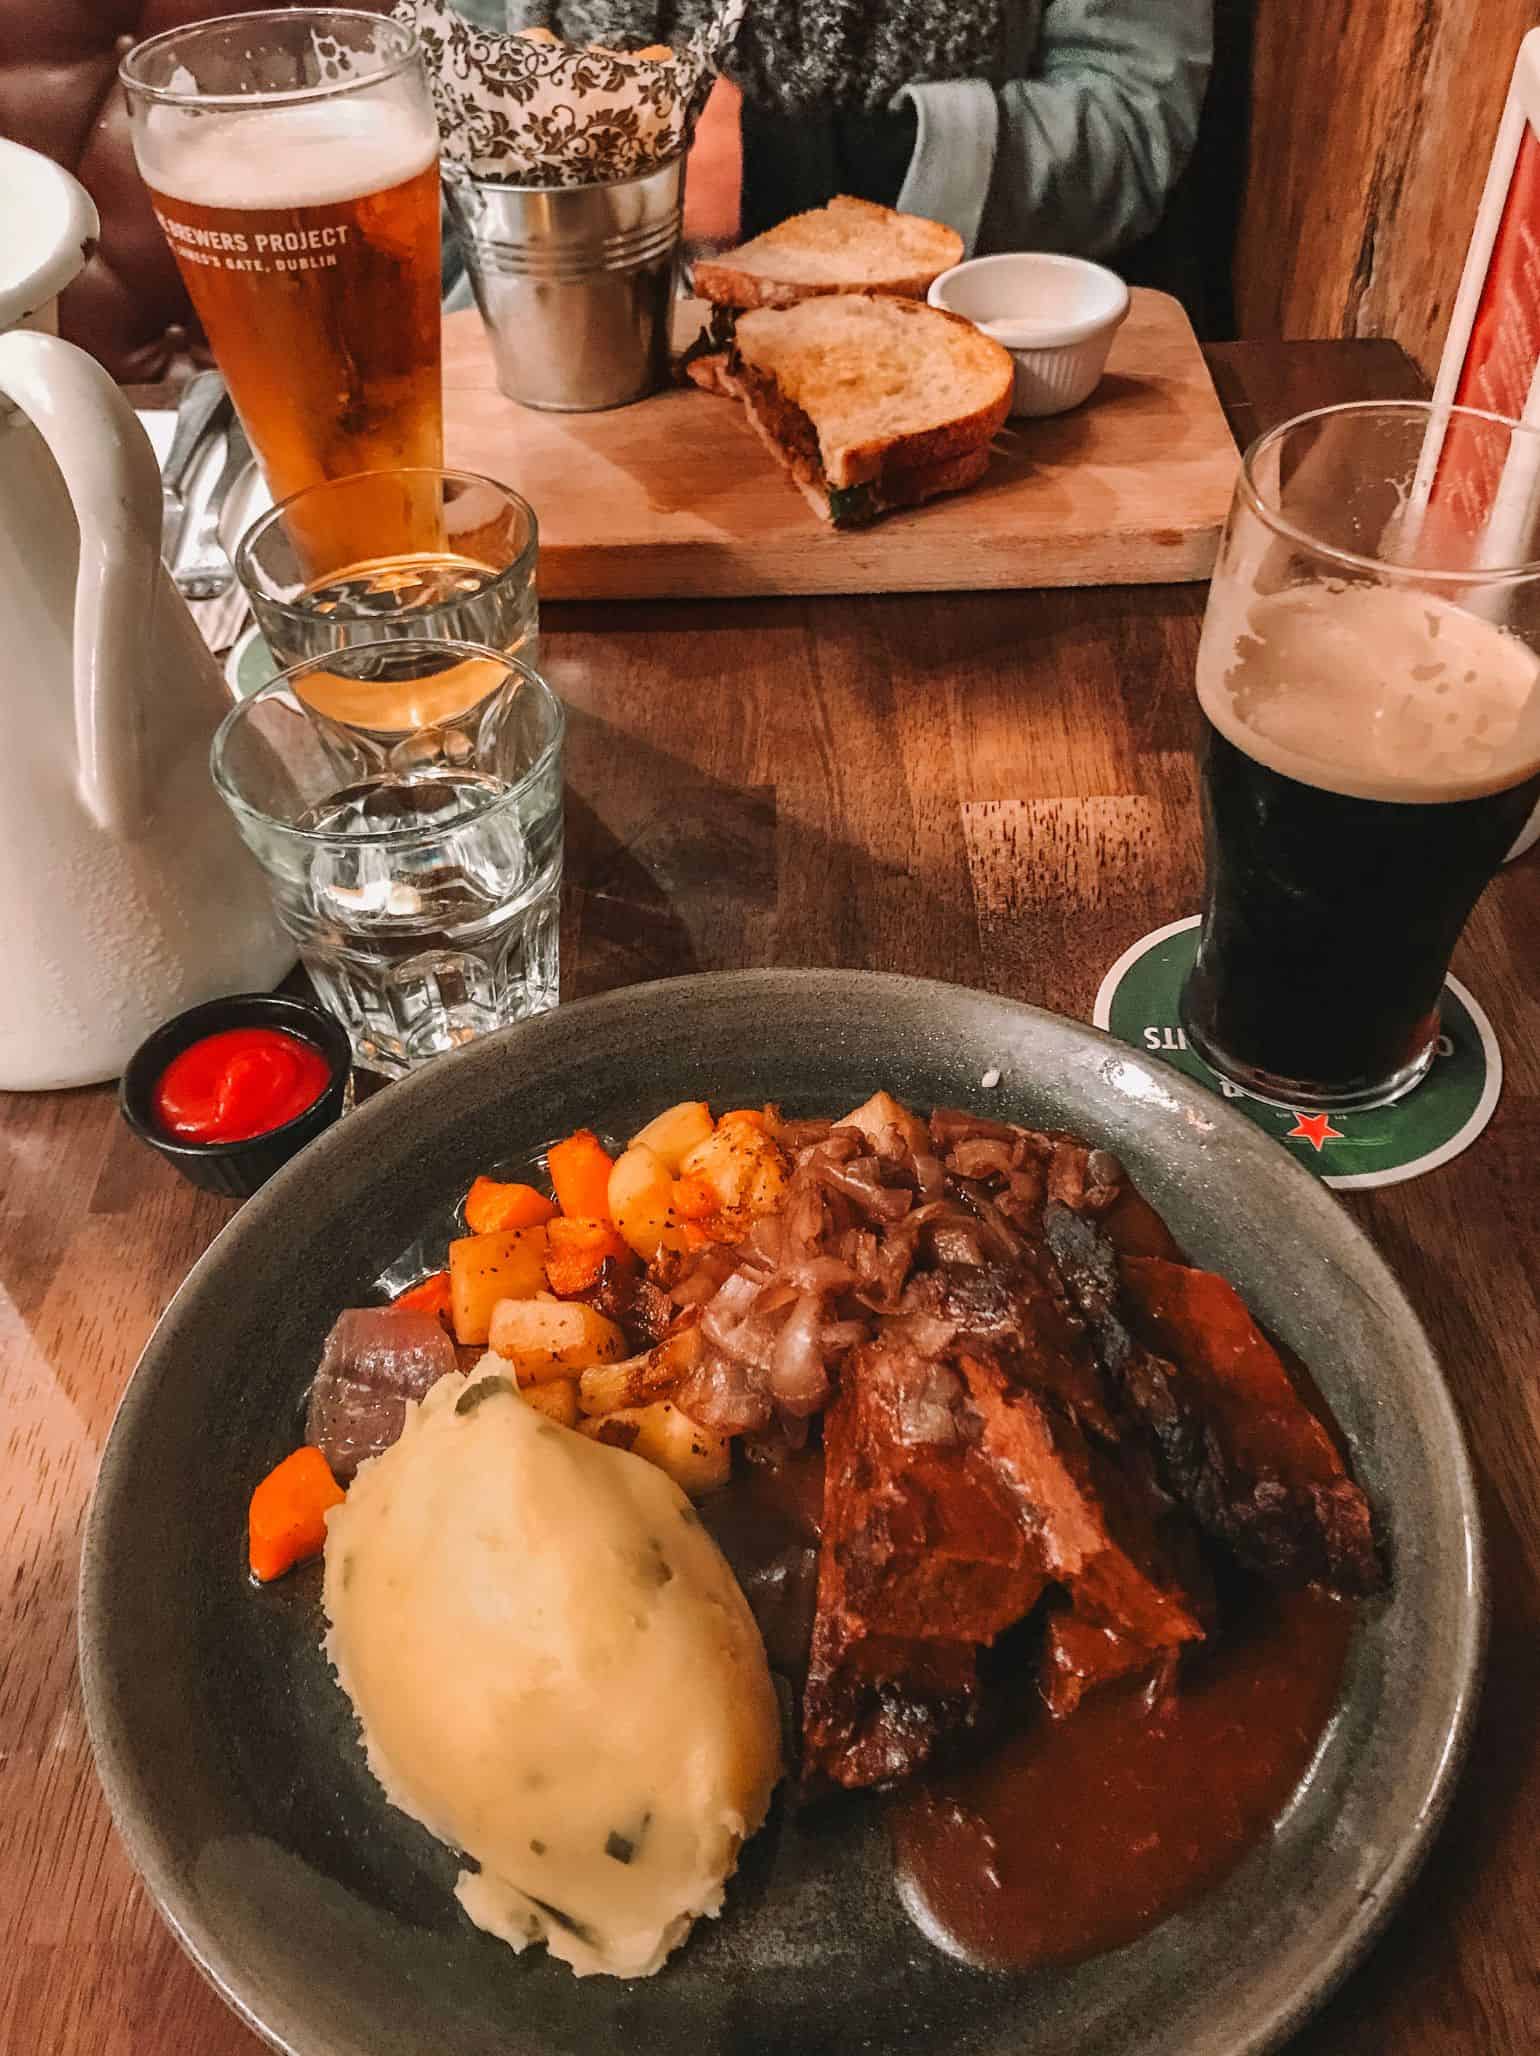 A hearty Irish meal from The King's Head Pub in Galway. 